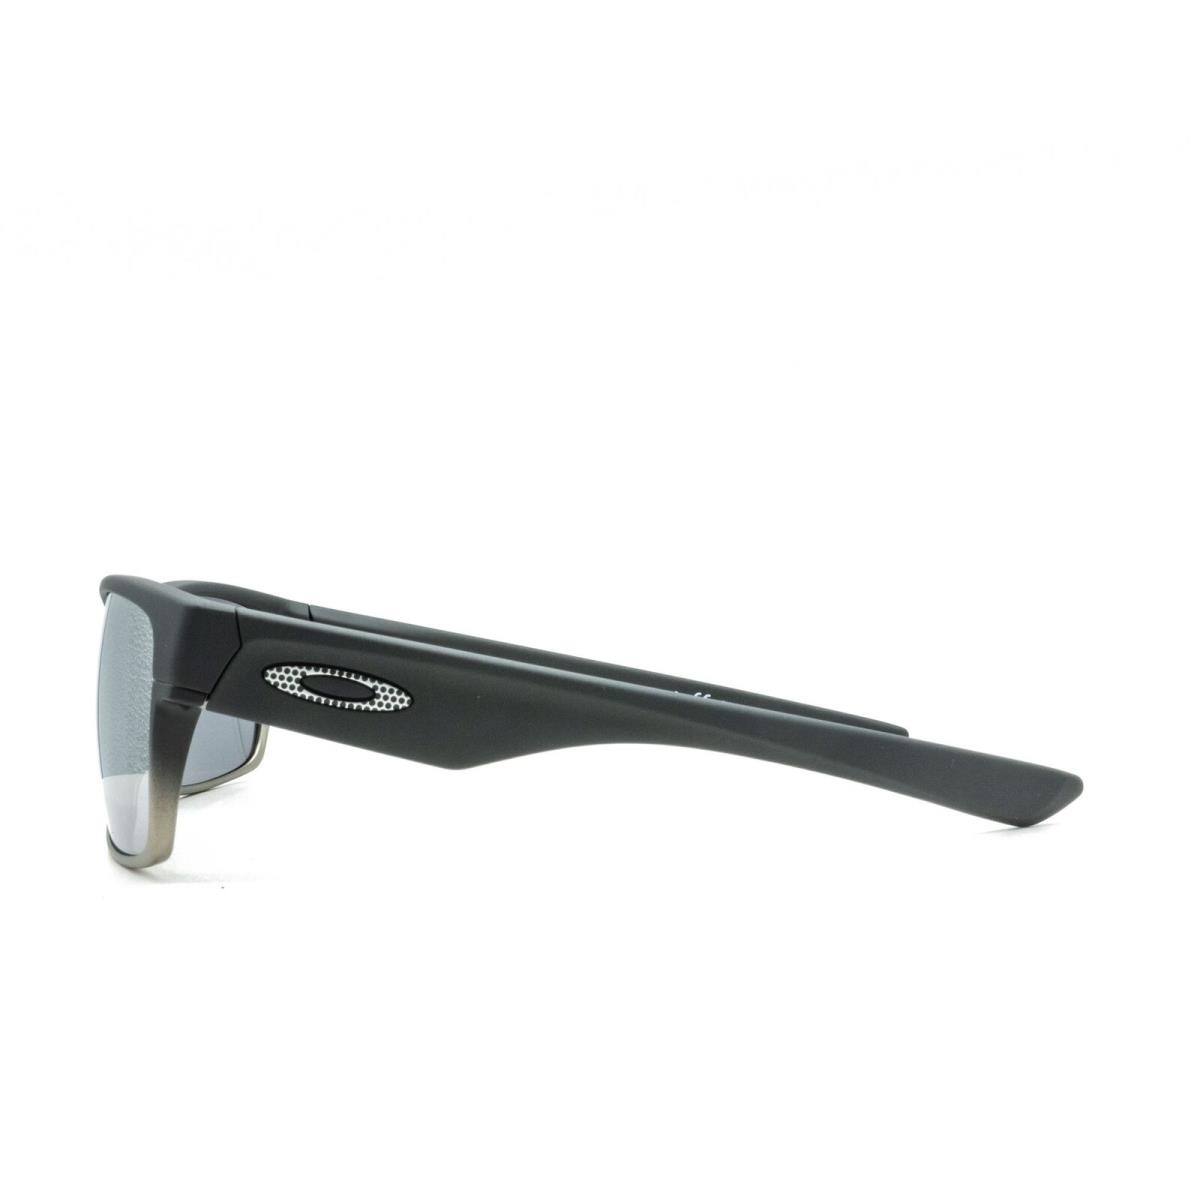 OO9189-30 Mens Oakley Two Face Machinist Sunglasses